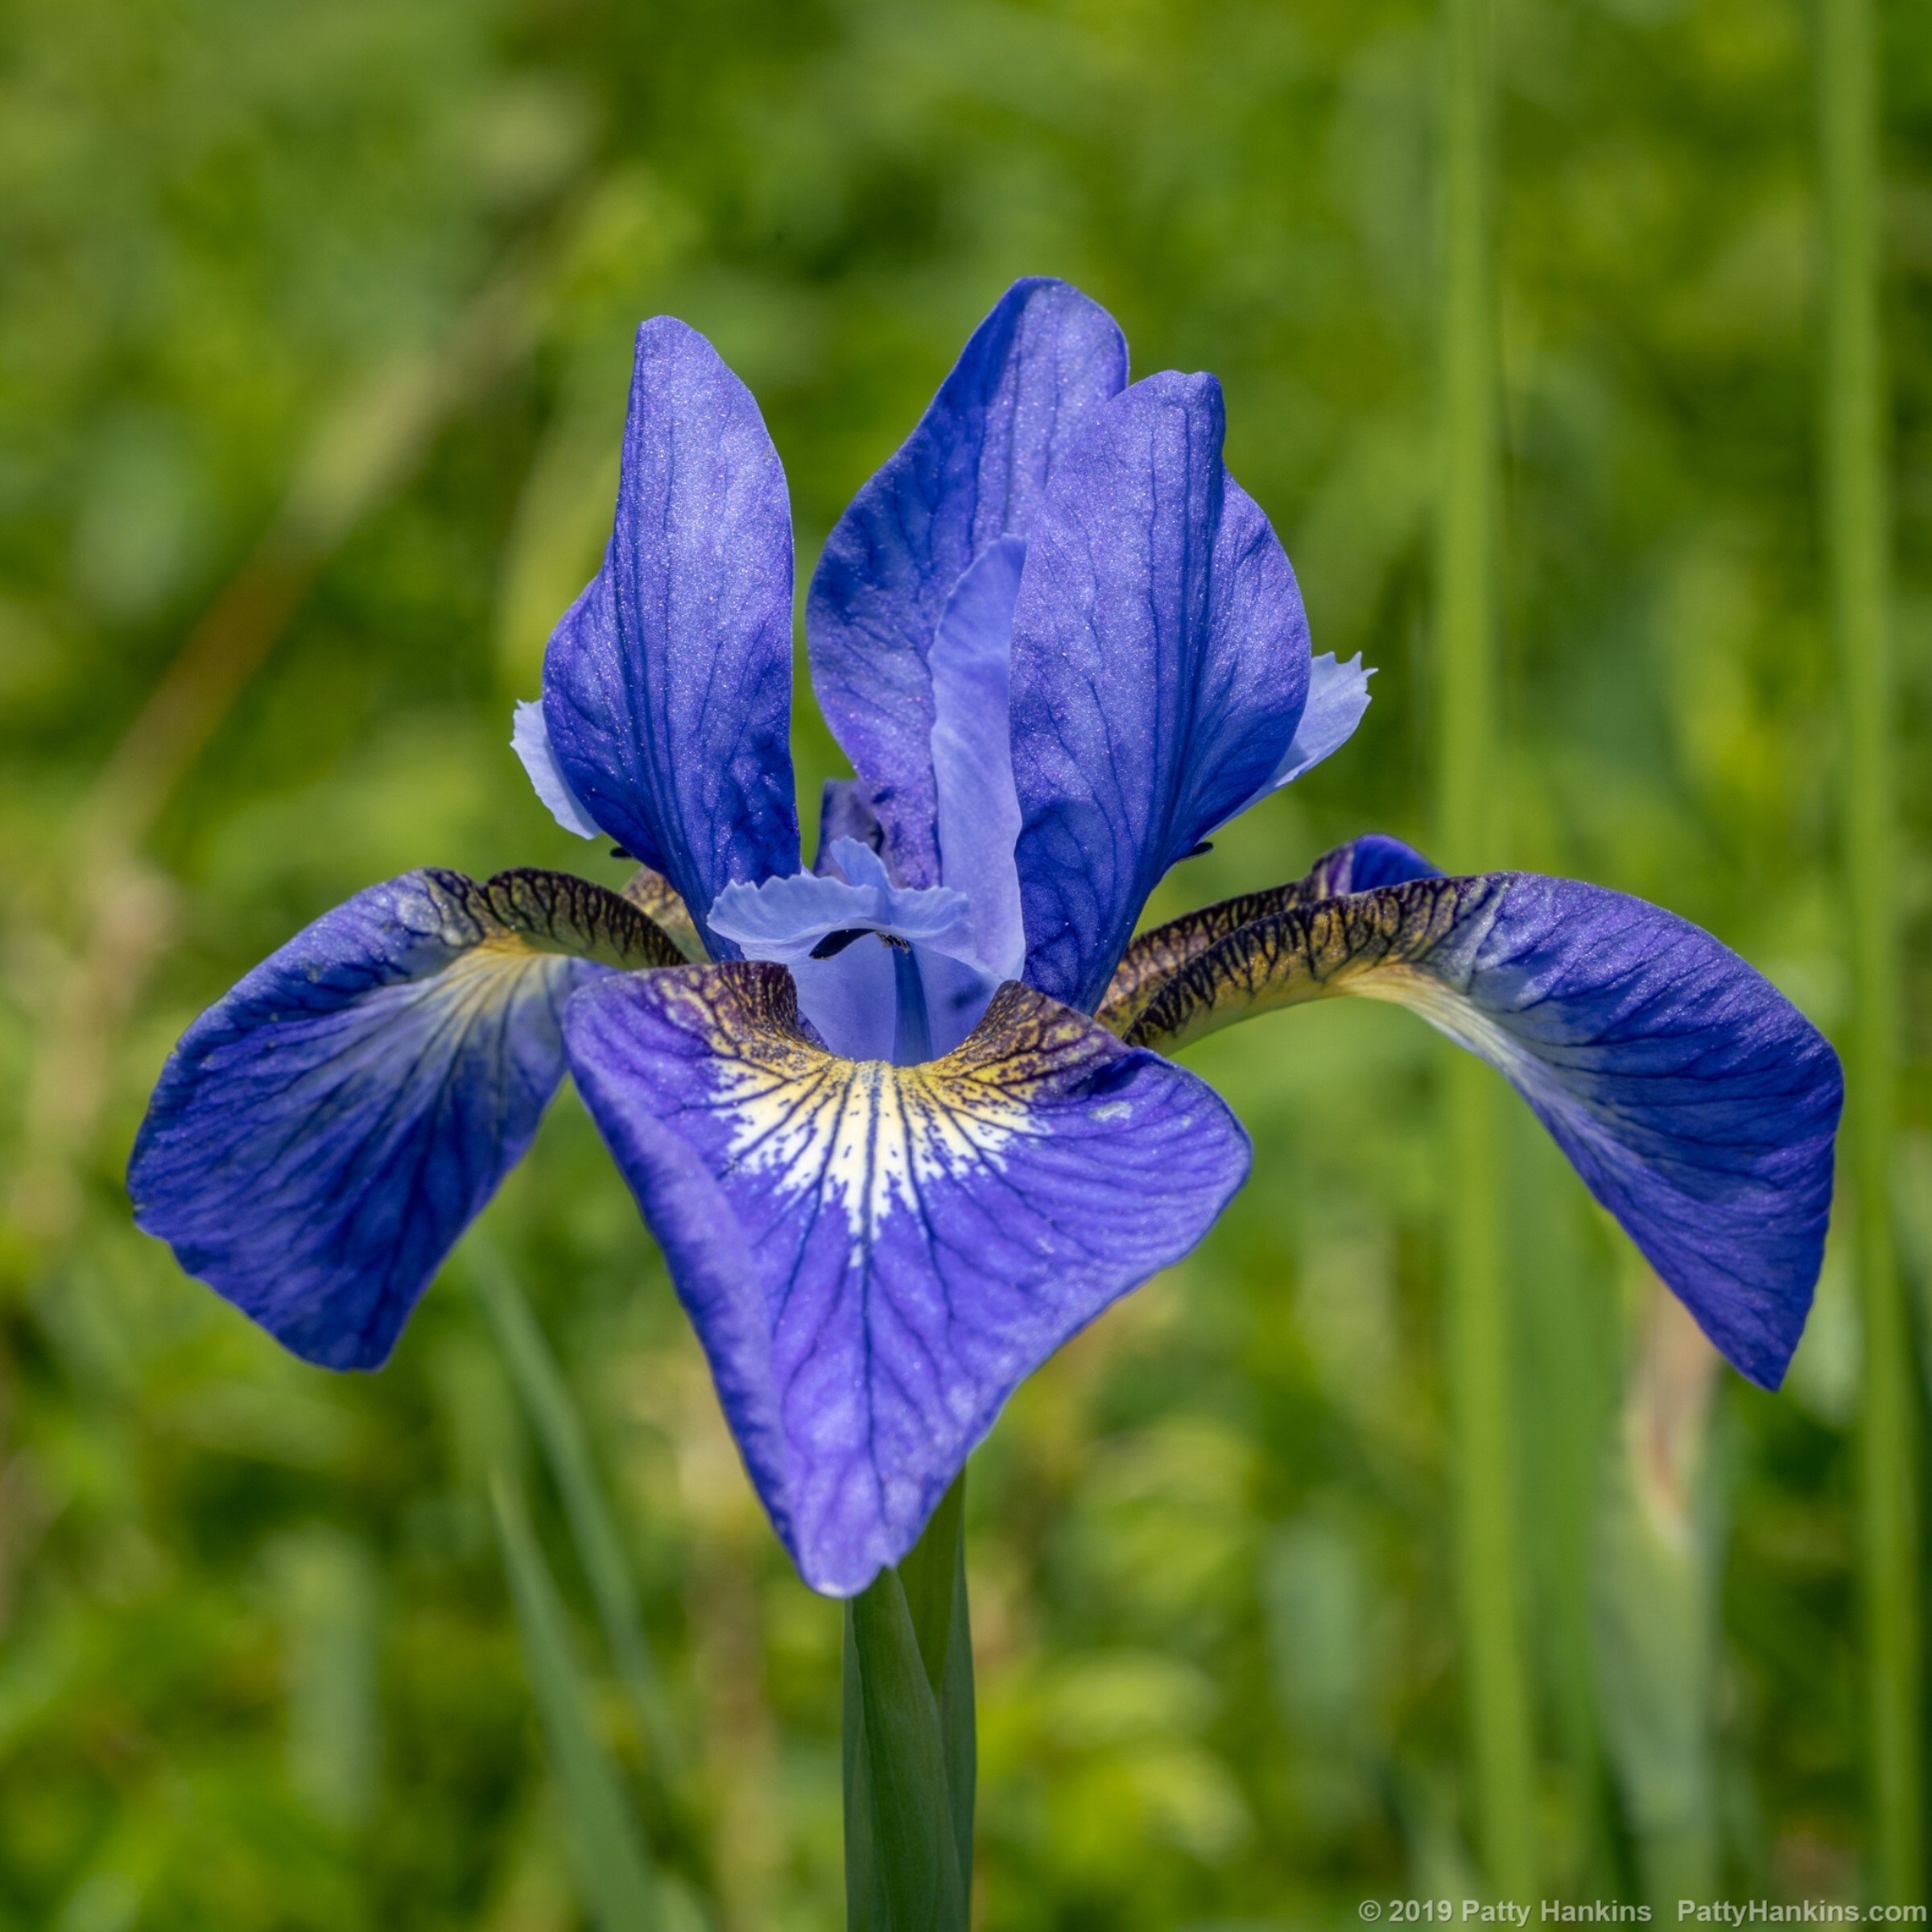 Iris in the Meadow at Ladew Topiary Gardens © 2019 Patty Hankins